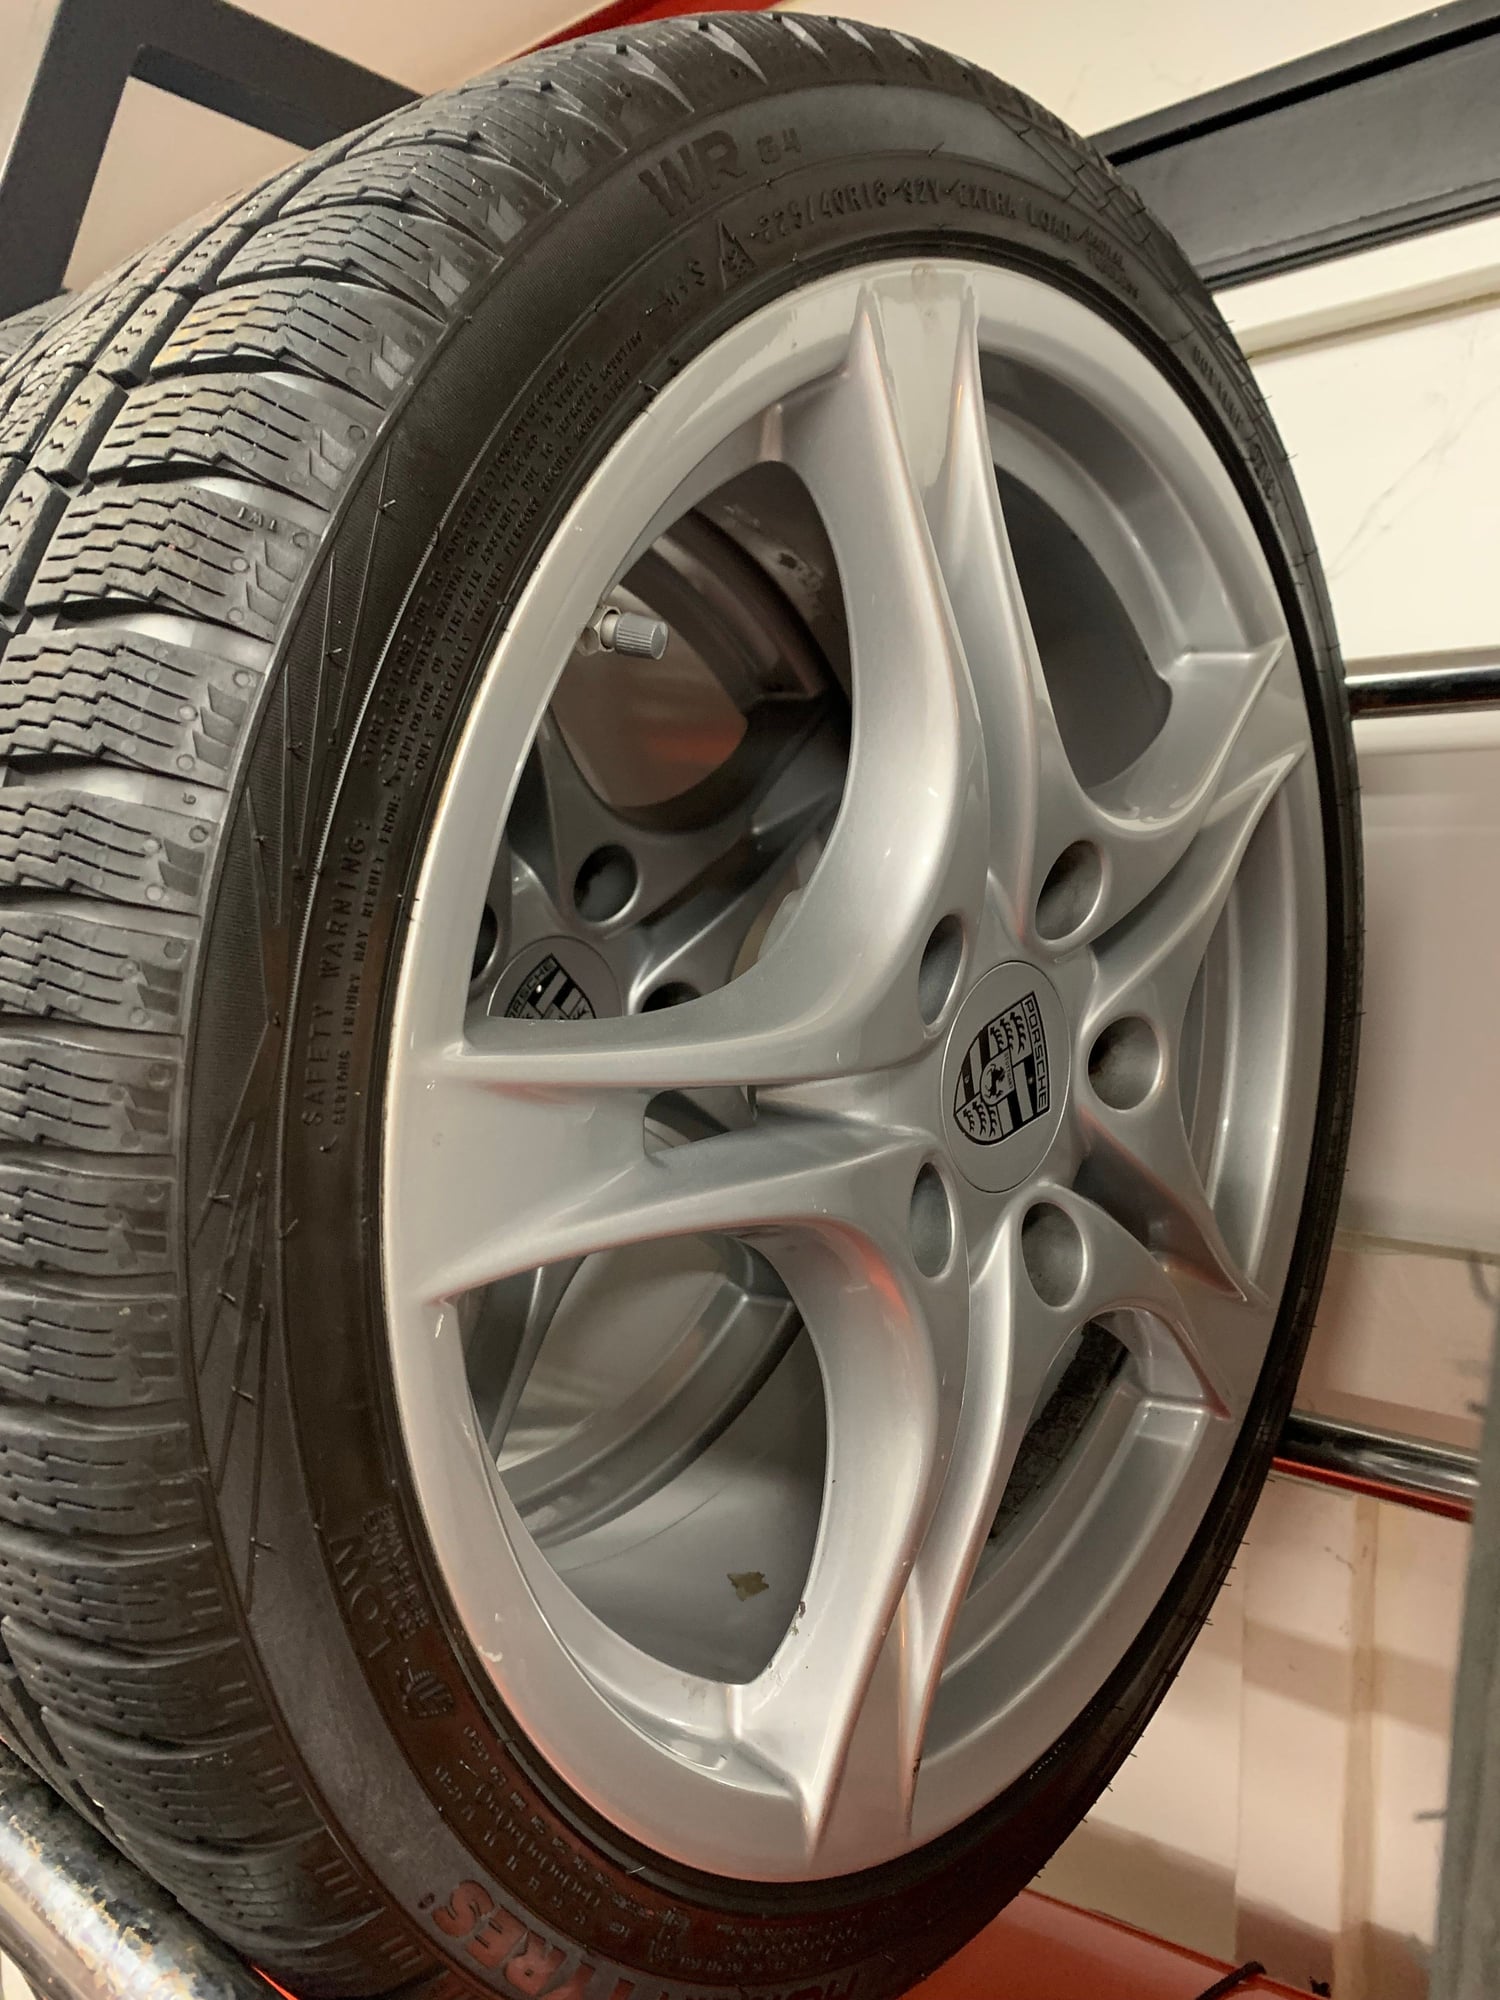 Wheels and Tires/Axles - Winter wheels & tires for 987.2 Cayman/Boxter - Used - 2009 to 2012 Porsche Cayman - Danbury, CT 06810, United States